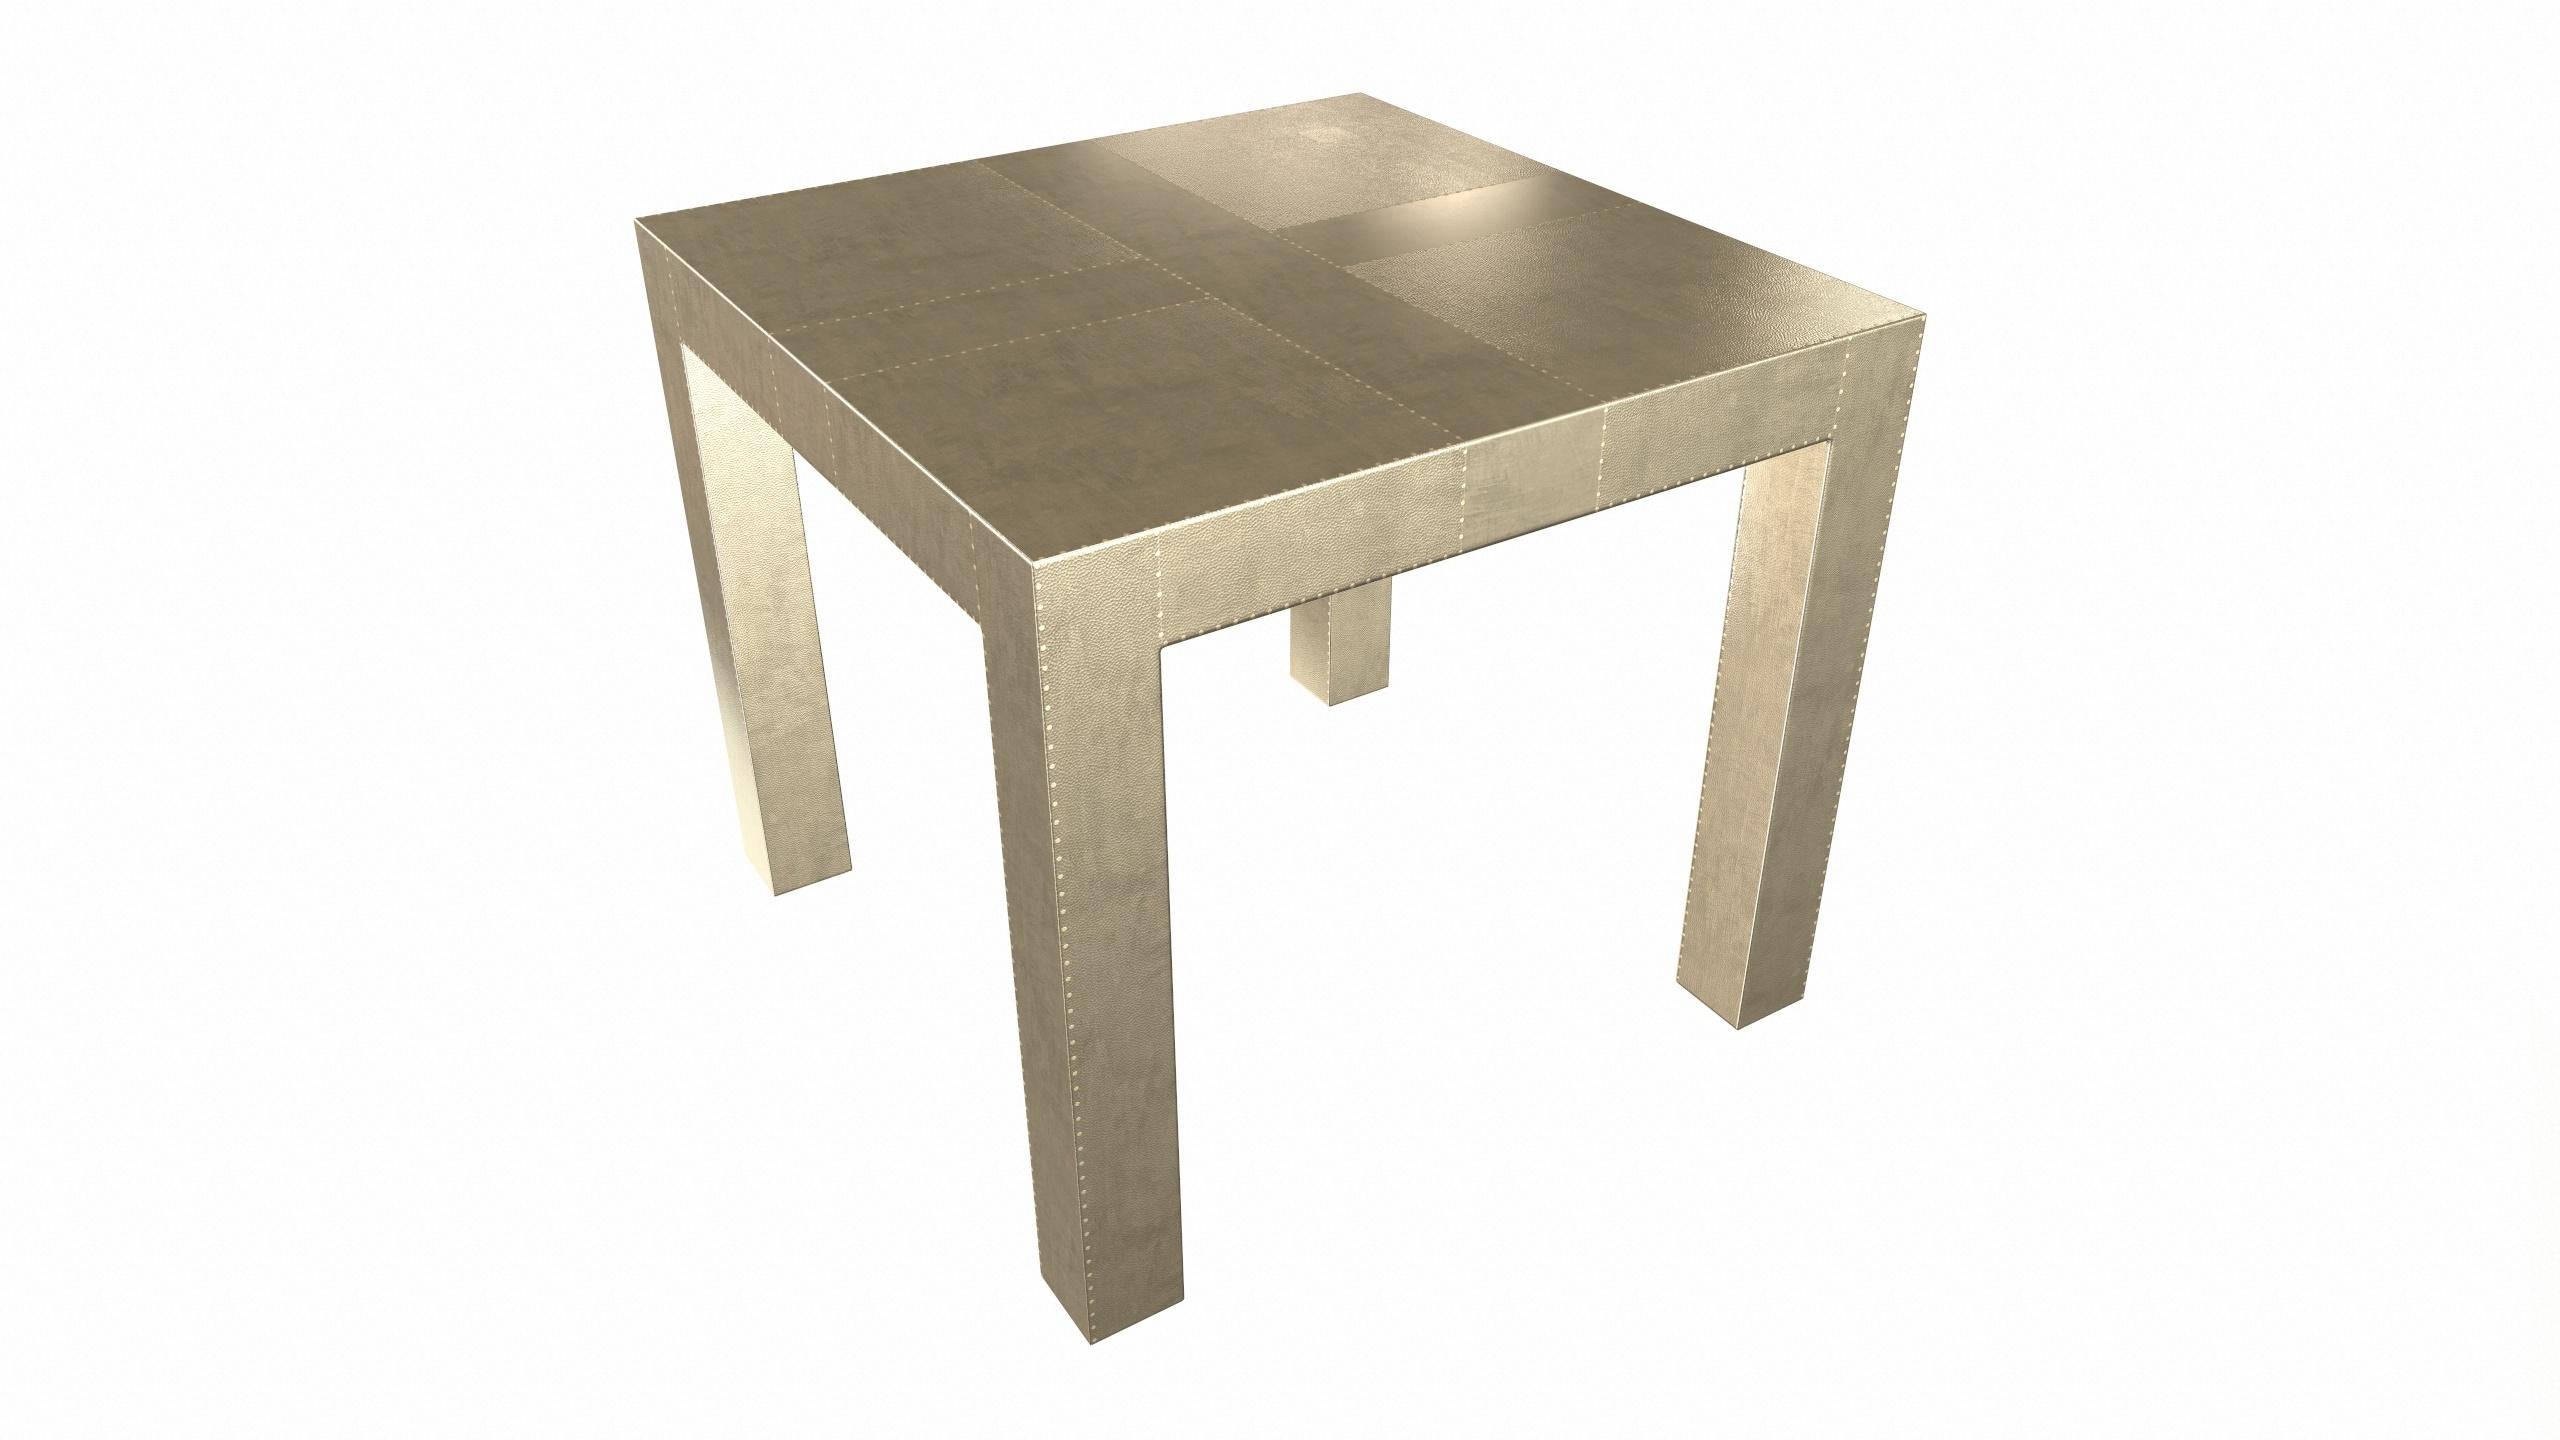 American Louise Art Deco Lowboys Square Drink Table Mid. Hammered Brass by Alison Spear For Sale